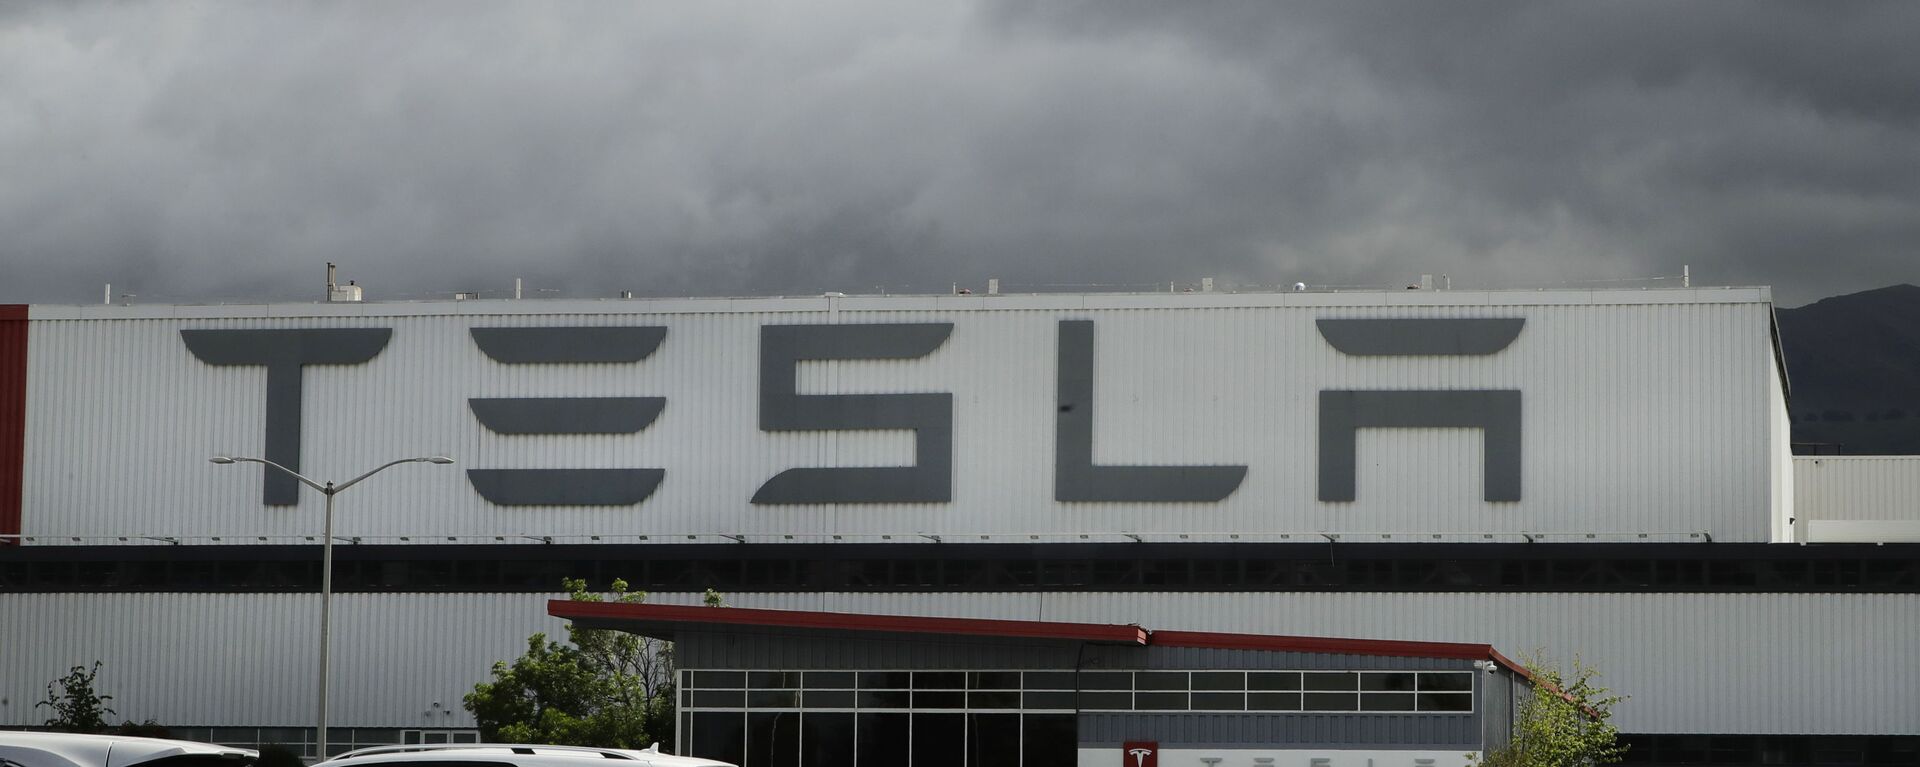 This May 12, 2020 file photo photo shows the Tesla plant in Fremont, Calif. Tesla is looking to raise up to $5 billion in capital through a stock offering as the electrical vehicle and solar panel maker seeks to take advantage of strong demand for its products.  - Sputnik International, 1920, 22.04.2021